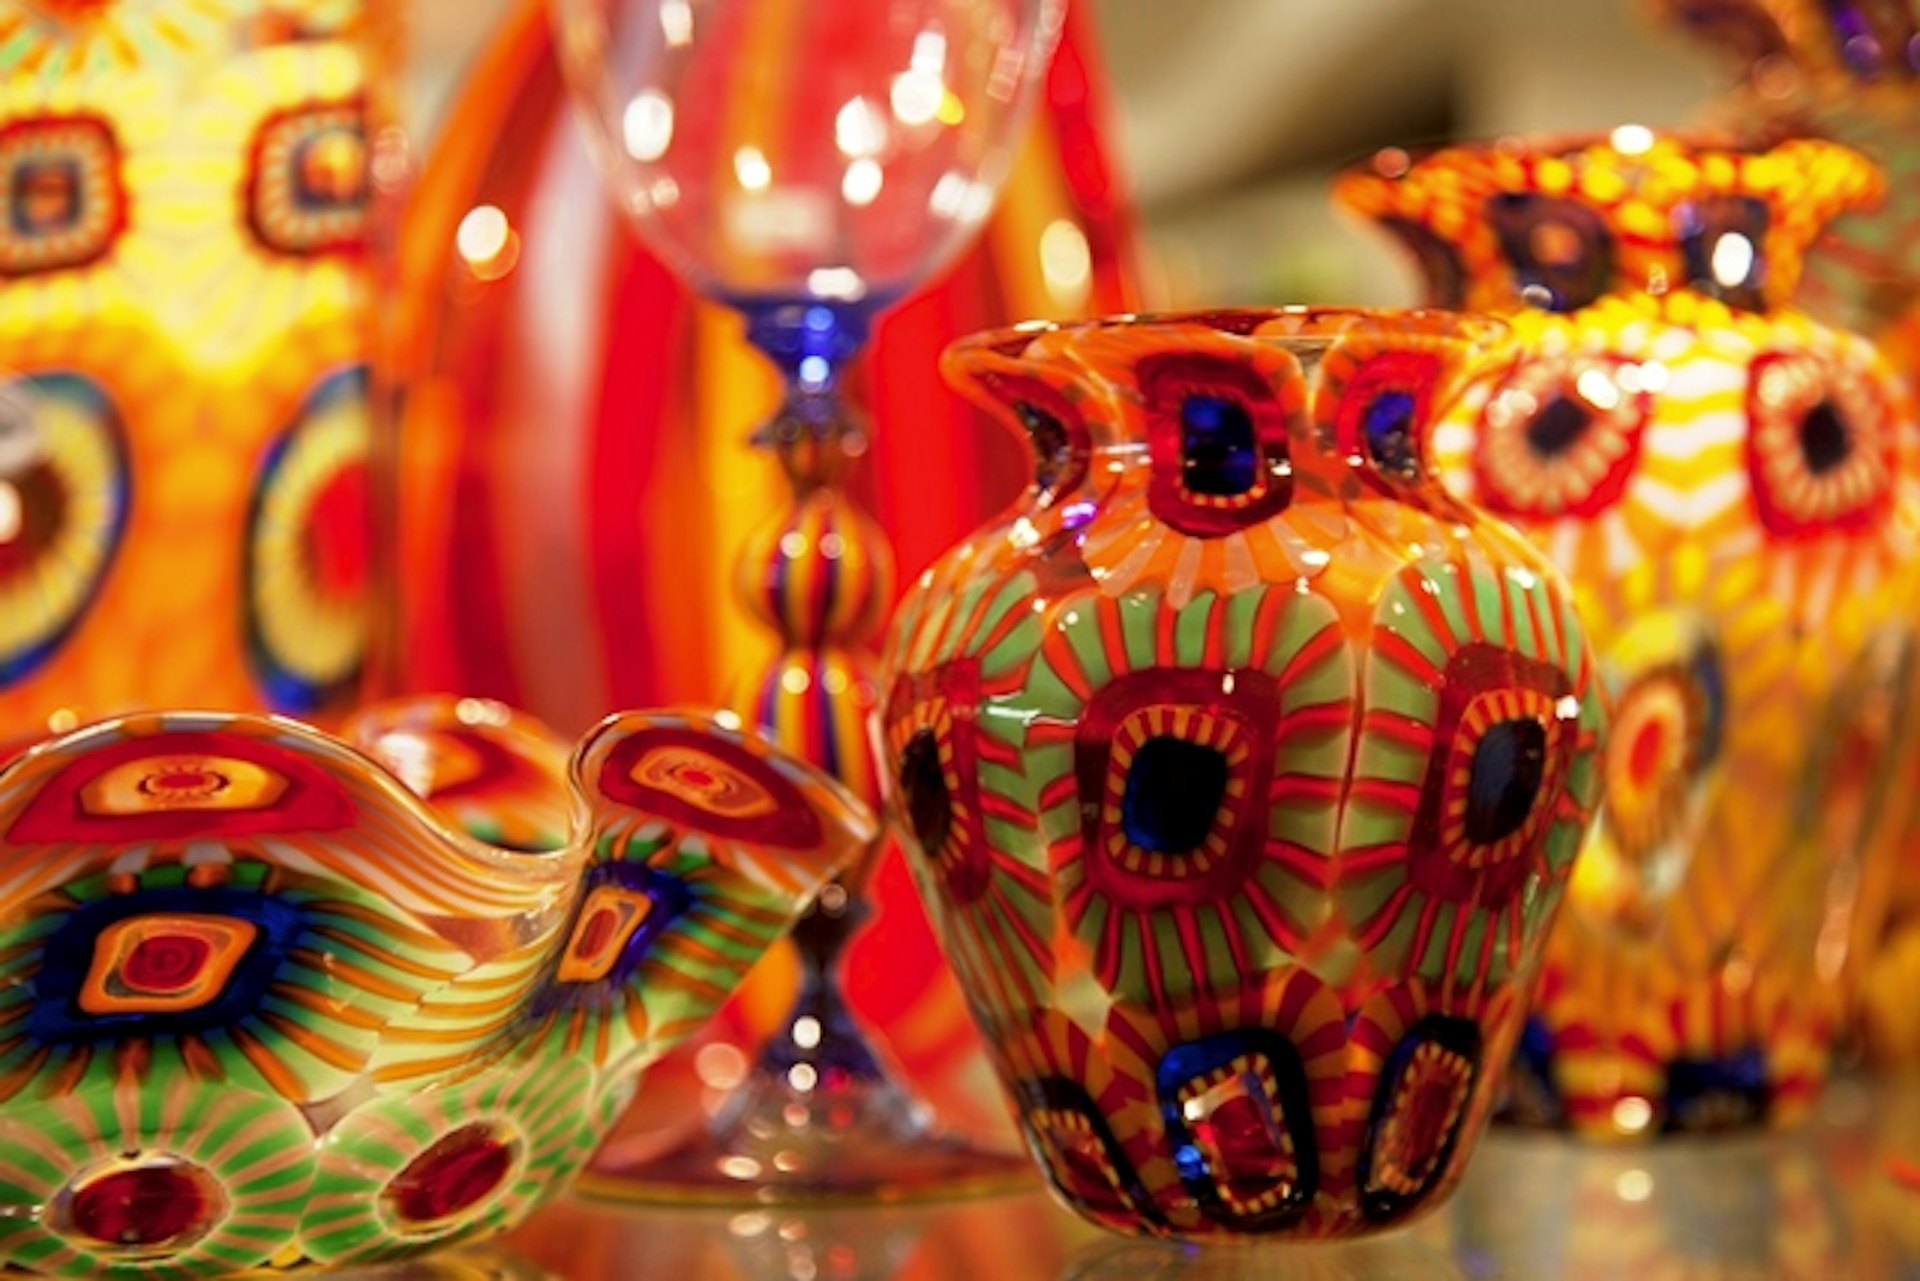 Murano glass is one of Venices' most famous exports. Image by Ken Scicana/ AWL Images/Getty